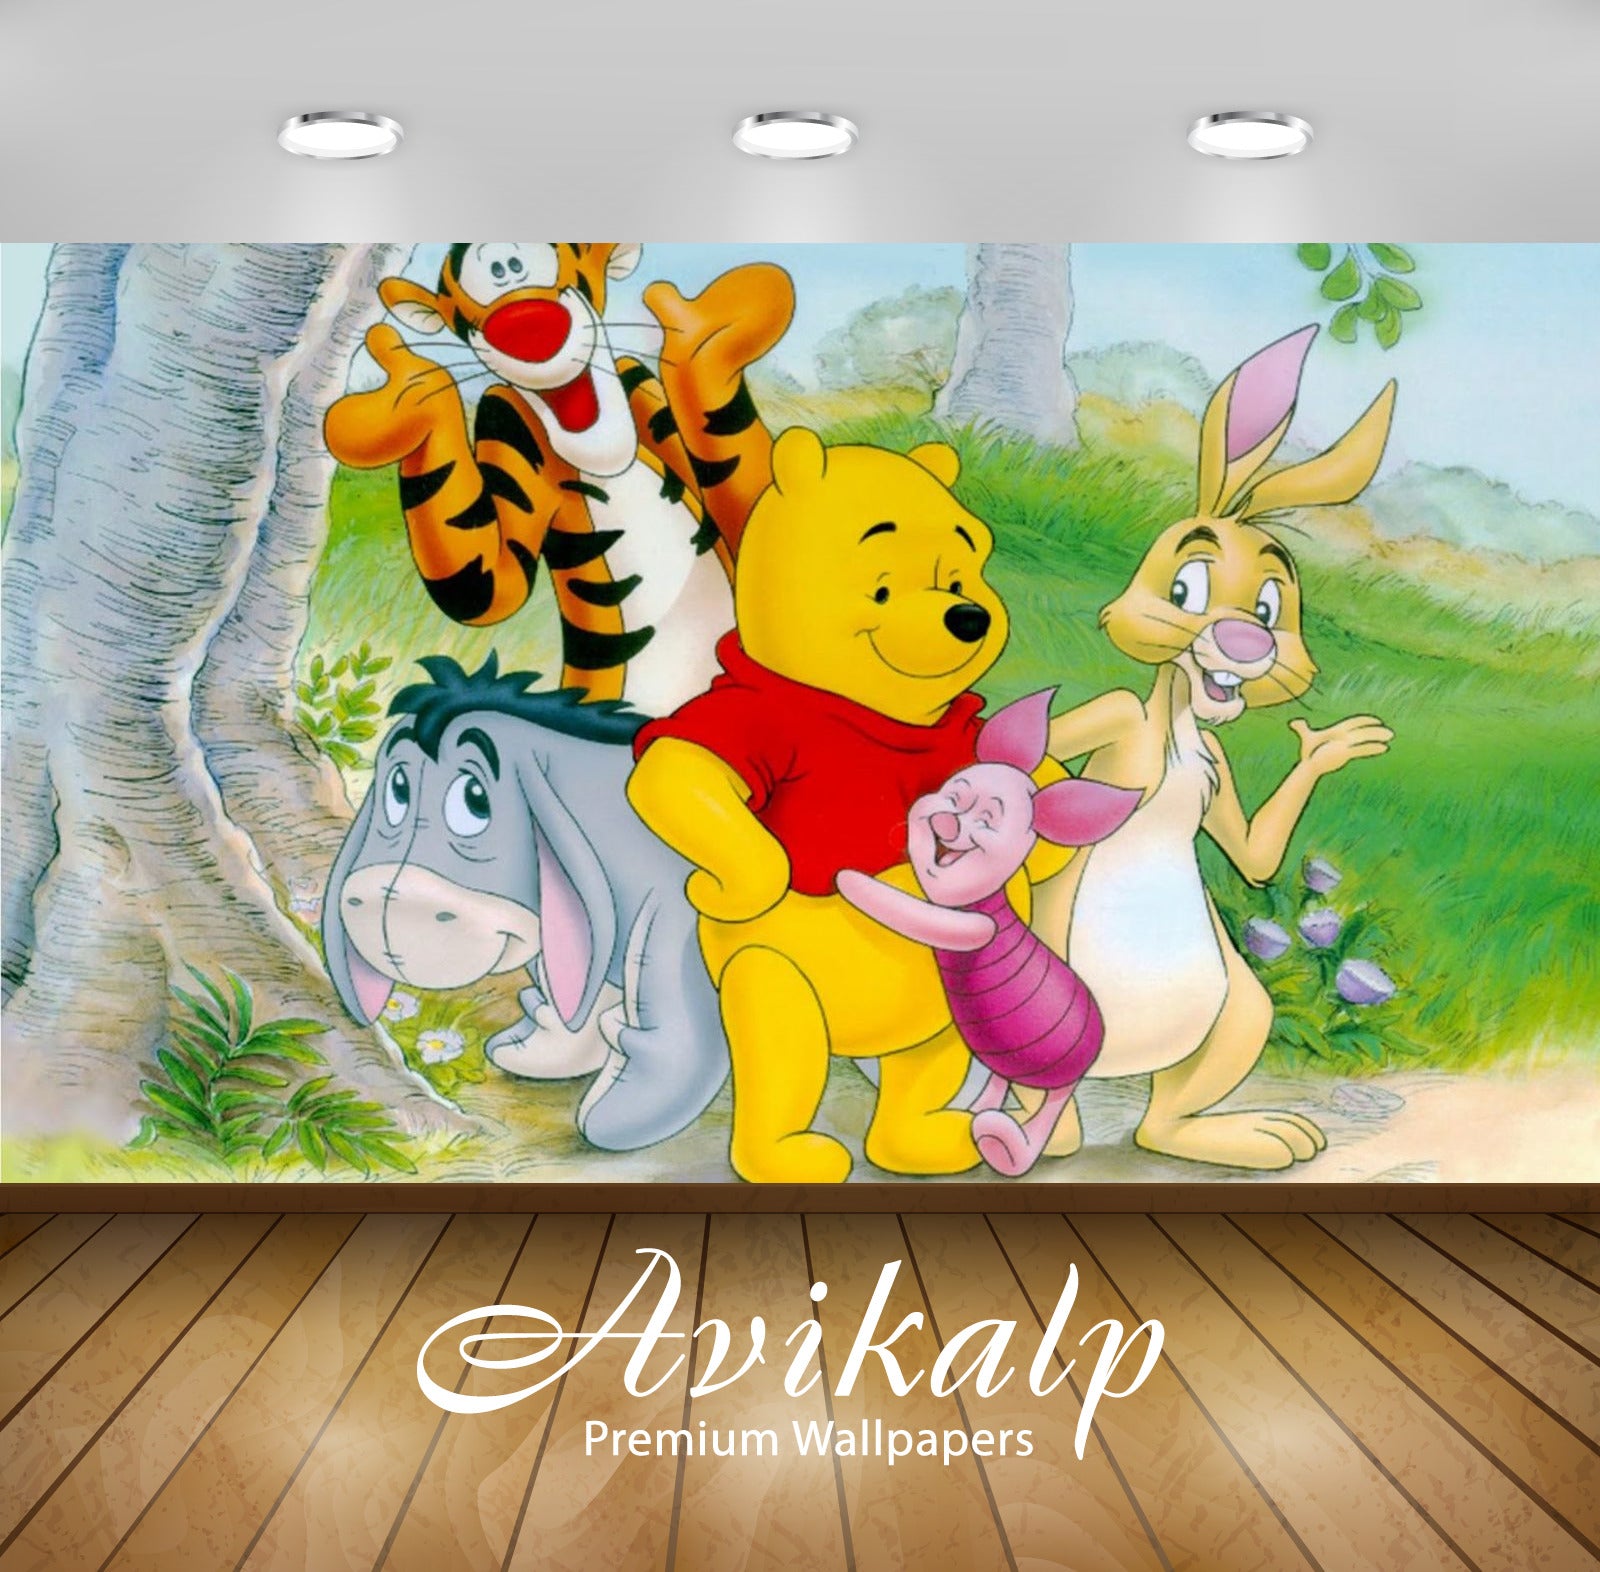 Avikalp Exclusive Awi2314 Winnie the Pooh and Friends Fairy Tale Full HD Wallpapers for Living room,